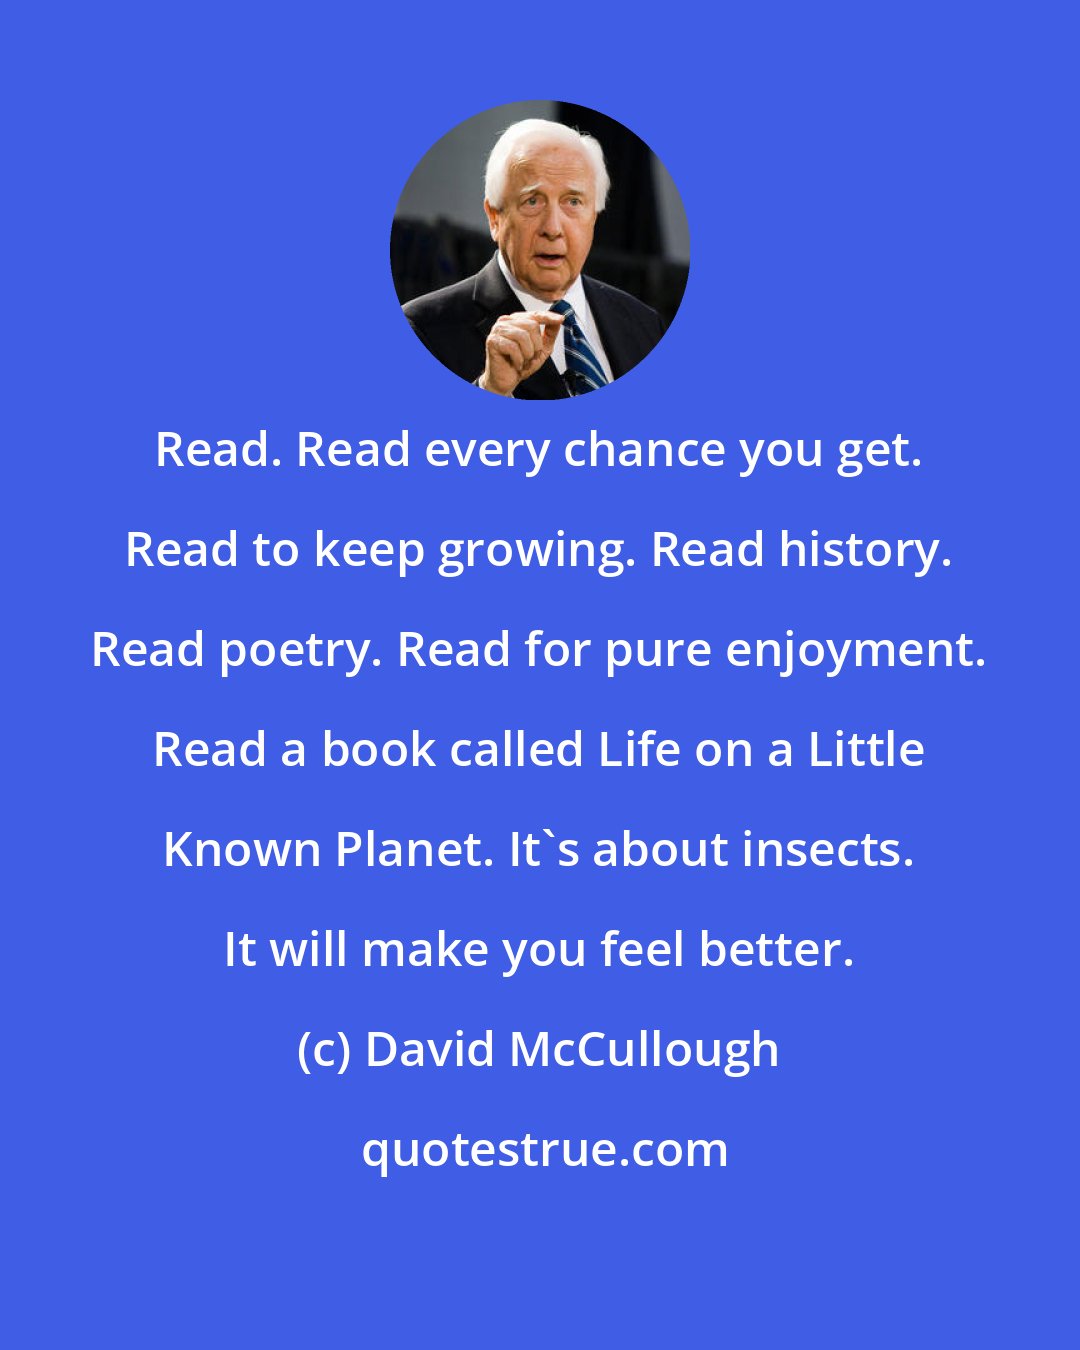 David McCullough: Read. Read every chance you get. Read to keep growing. Read history. Read poetry. Read for pure enjoyment. Read a book called Life on a Little Known Planet. It's about insects. It will make you feel better.